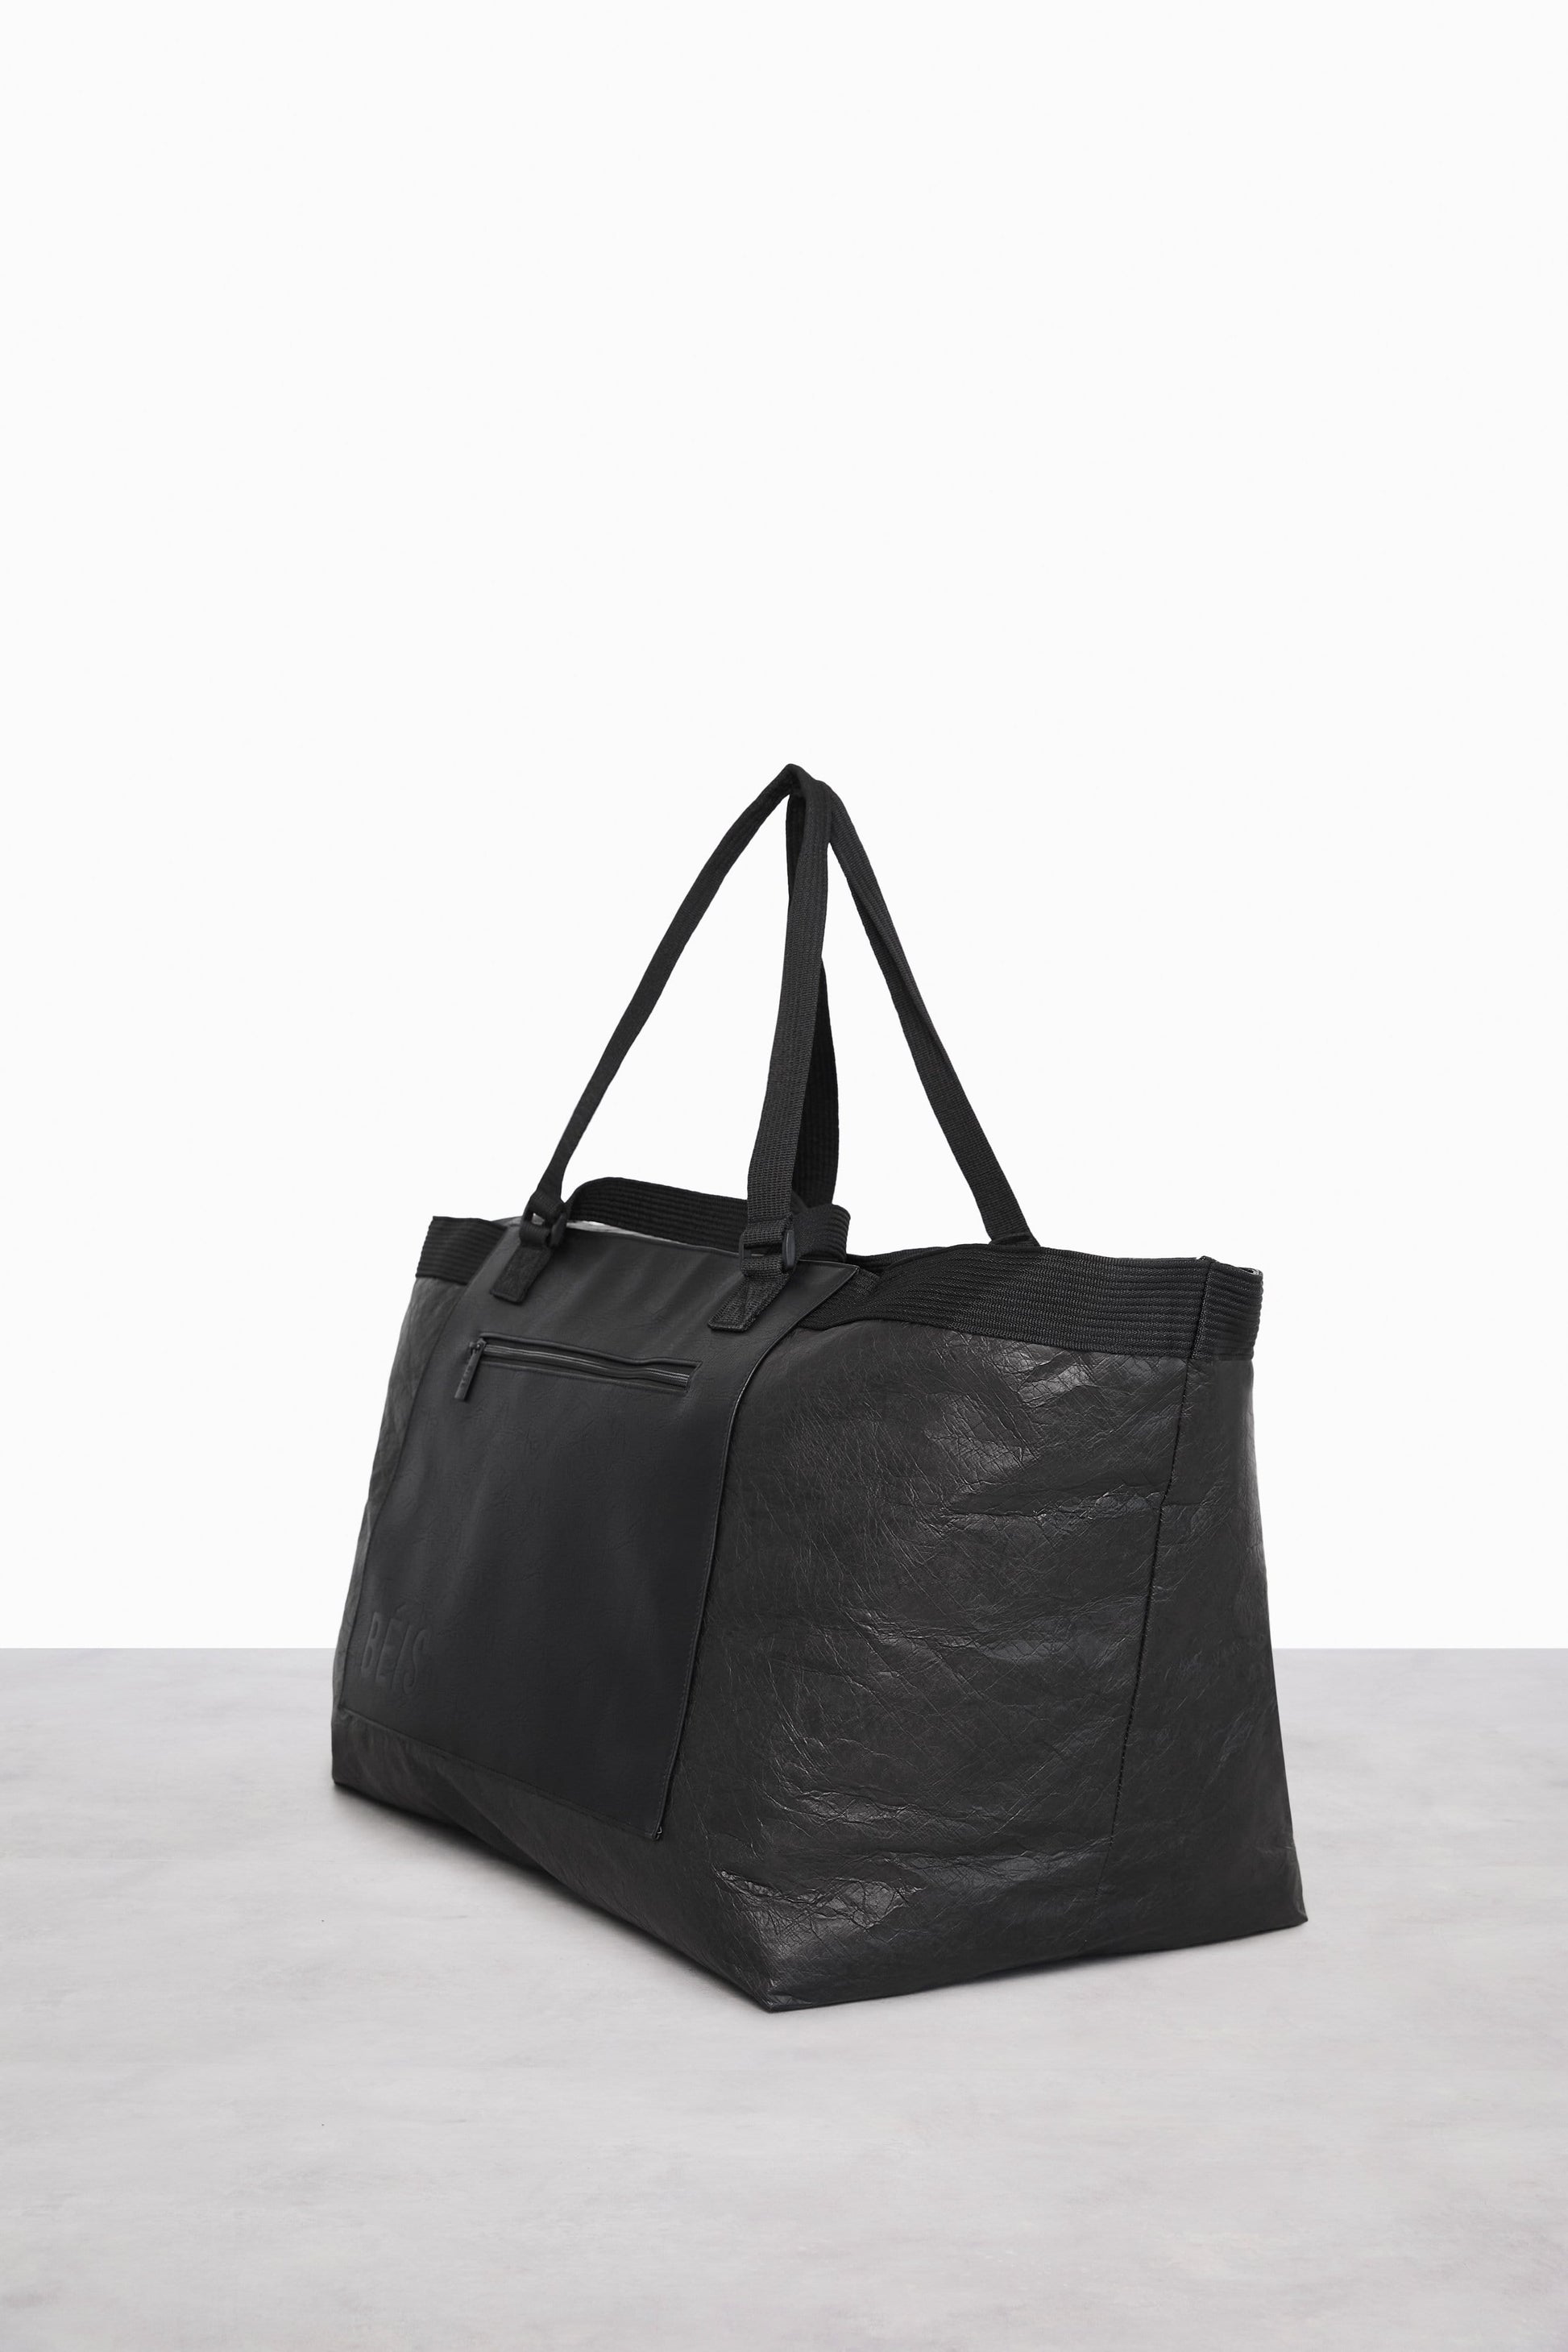 Extra Large Tote Black Side